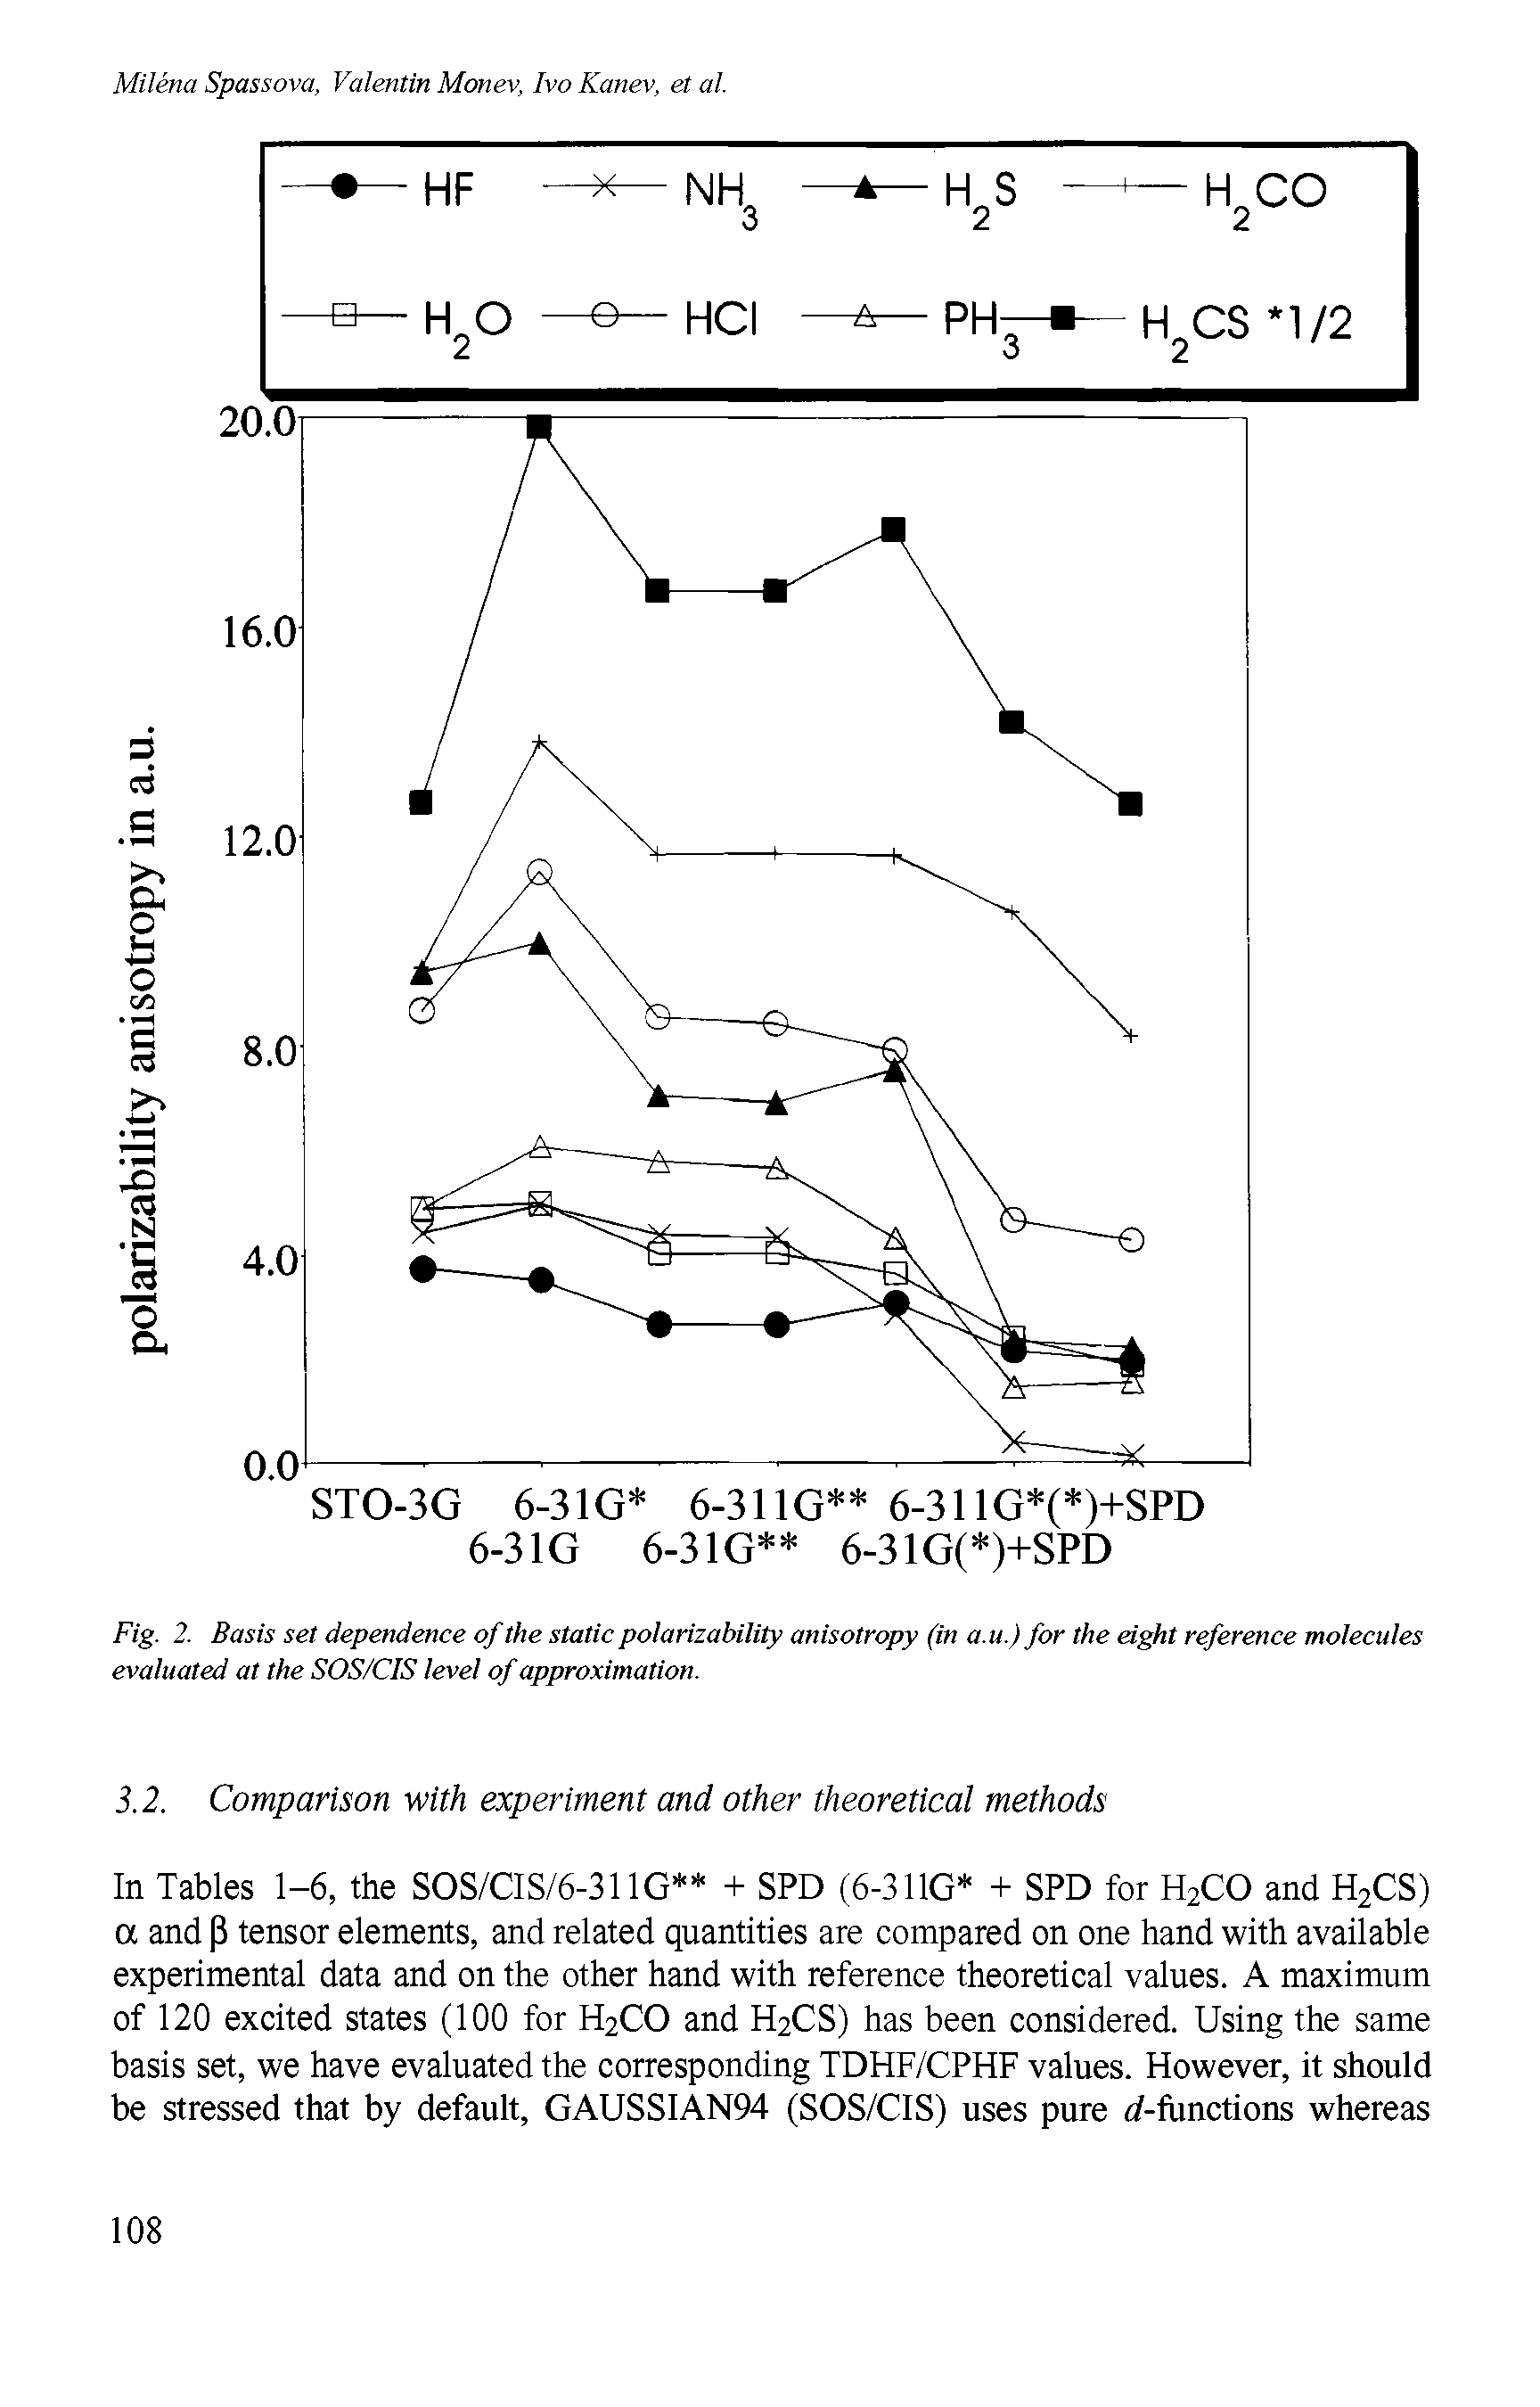 Fig. 2. Basis set dependence of the static polarizability anisotropy (in a.u.) for the eight reference molecules evaluated at the SOS/CIS level of approximation.